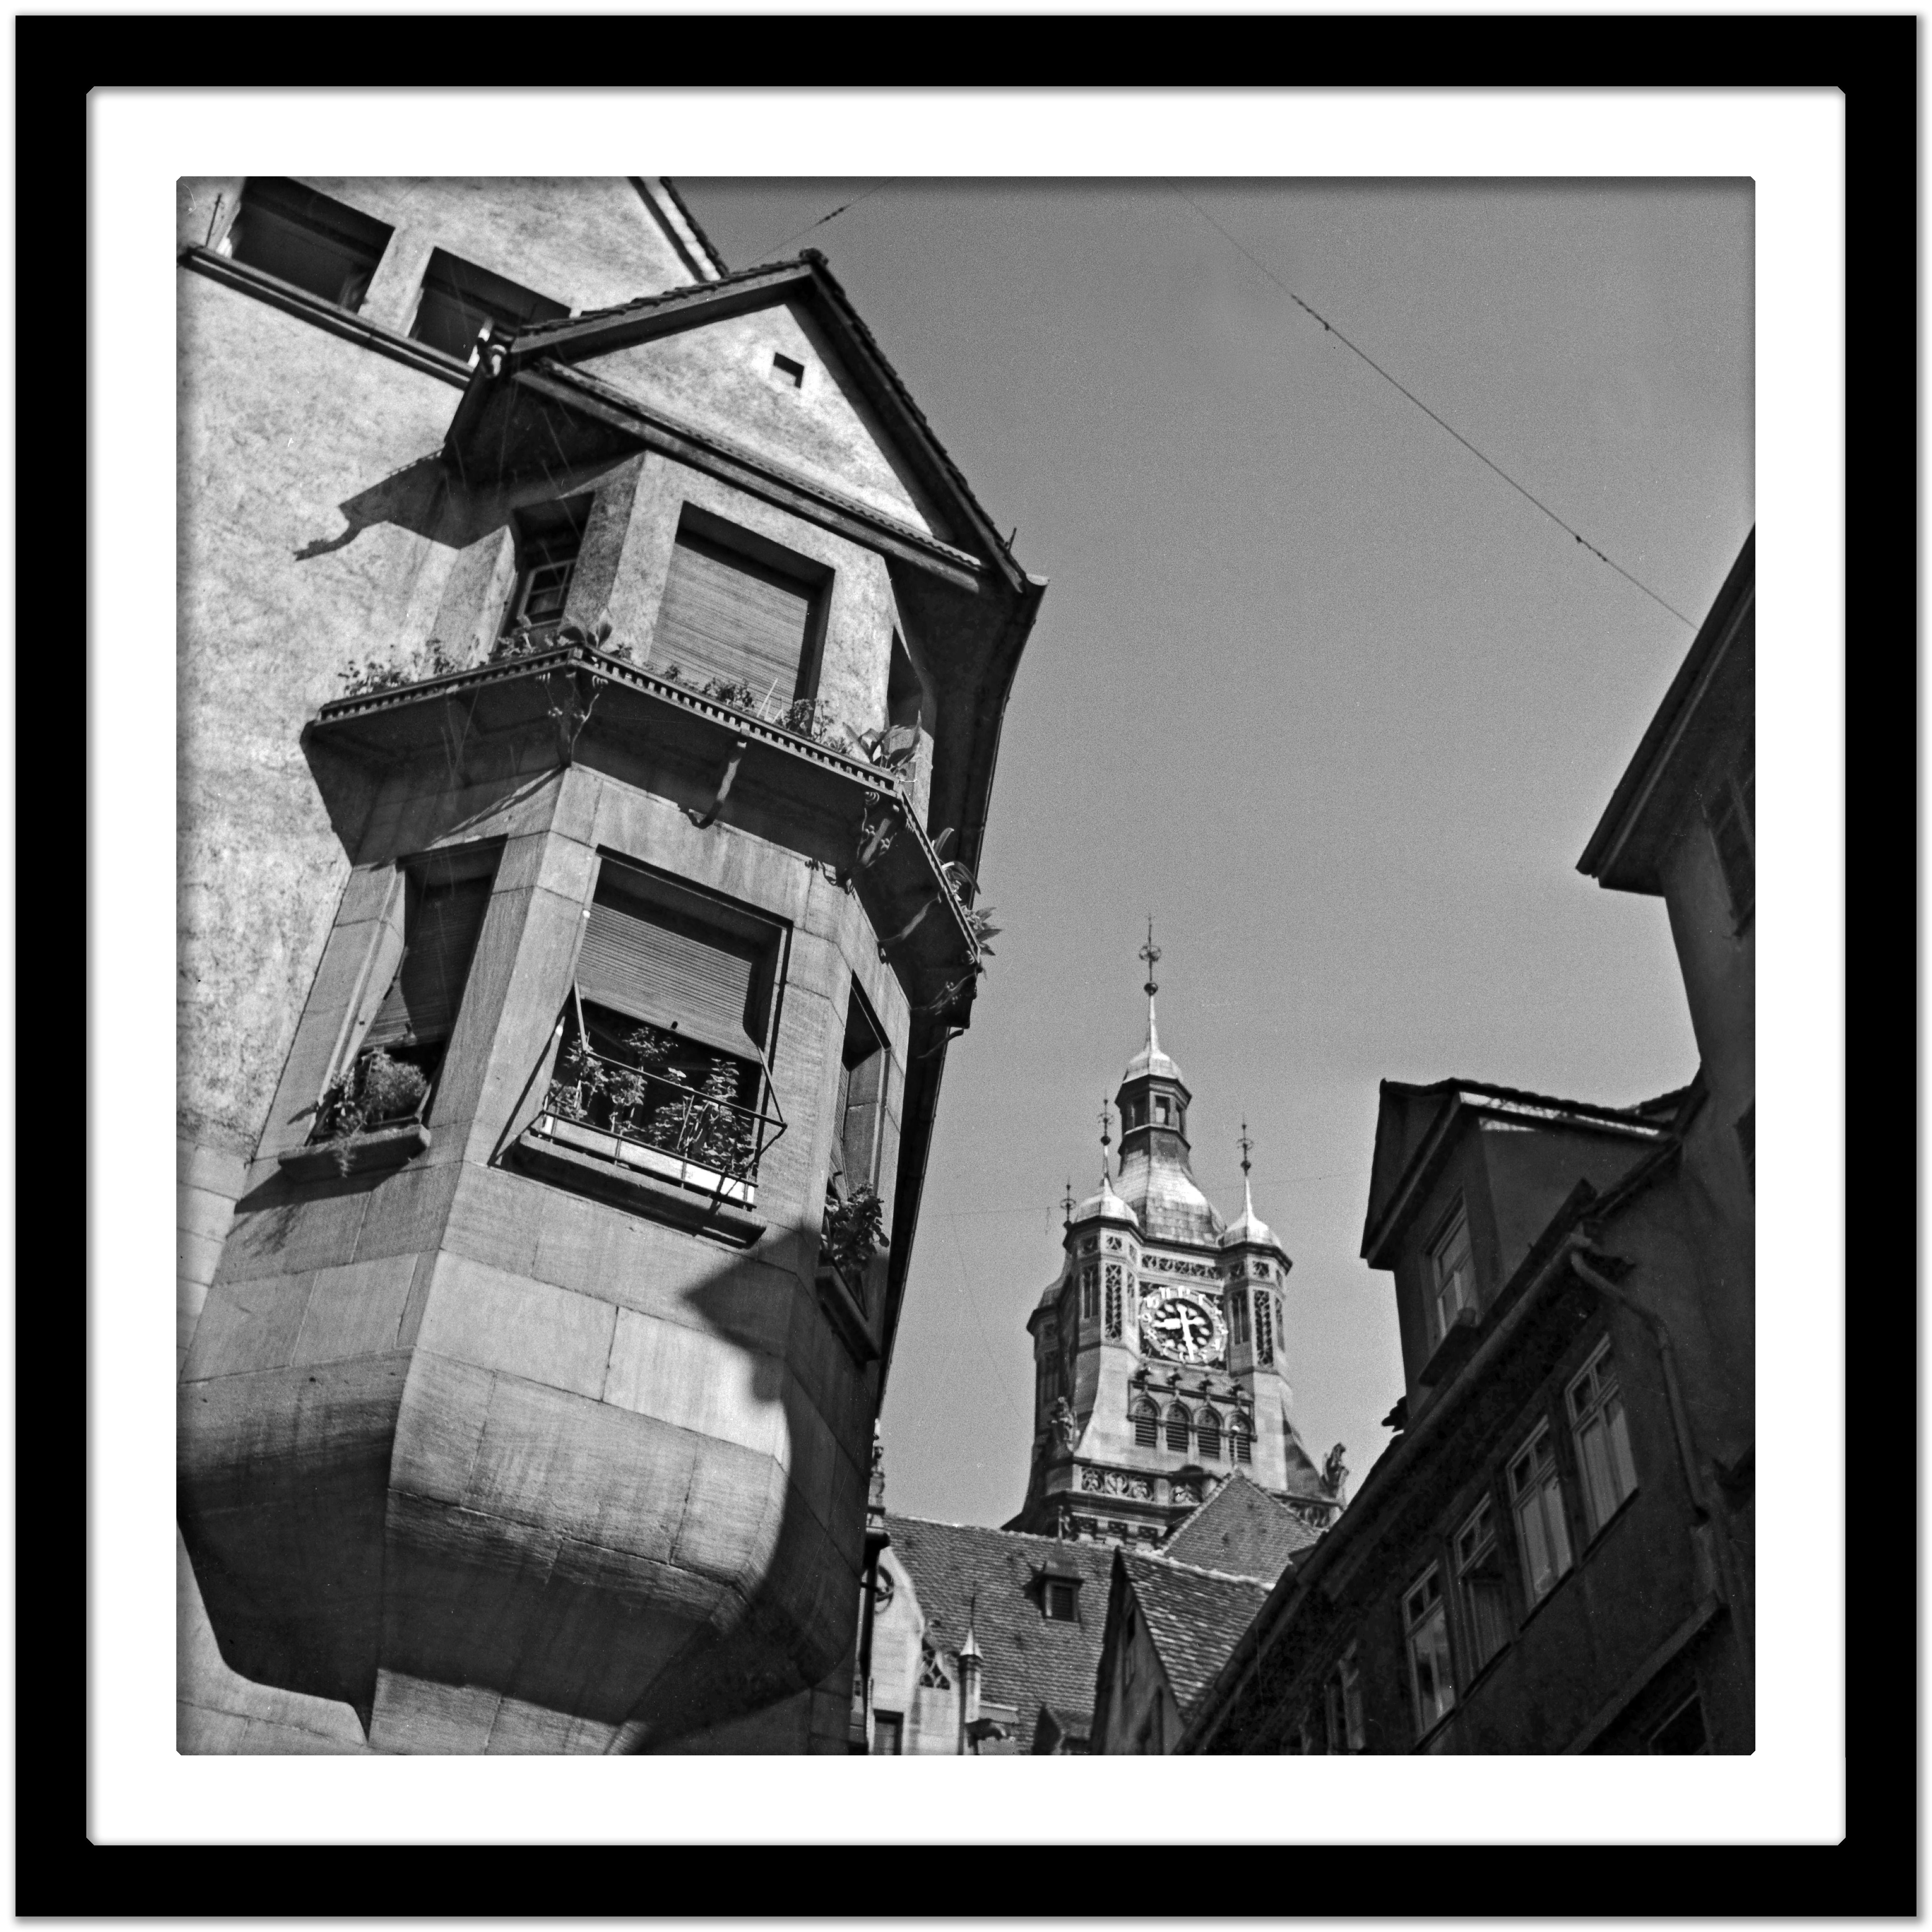 View to the old city hall, Stuttgart Germany 1935, Printed Later - Modern Photograph by Karl Heinrich Lämmel